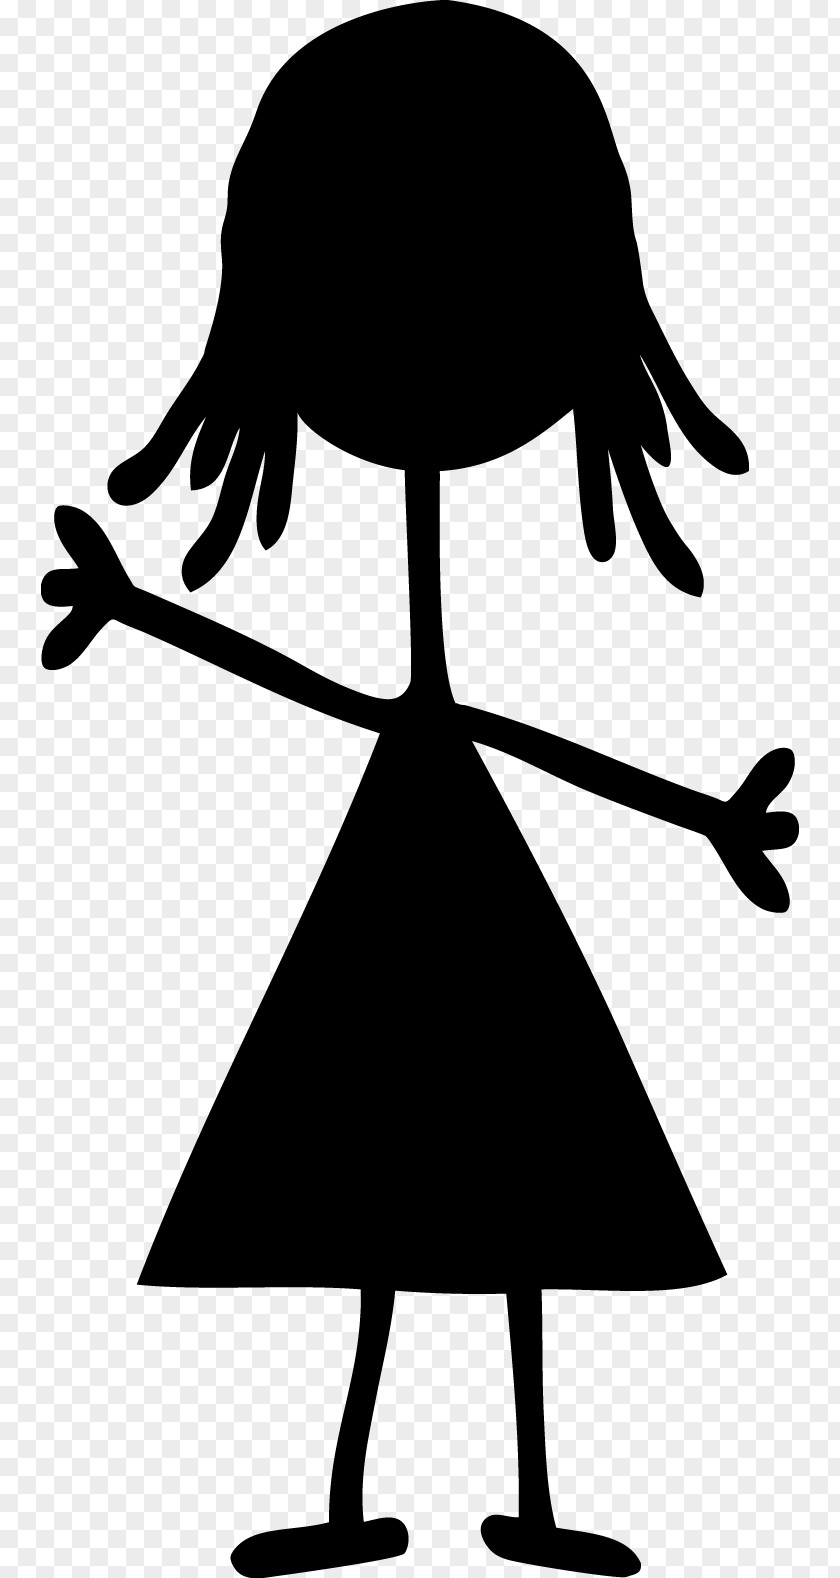 Clip Art Silhouette Stick Figure Drawing Image PNG